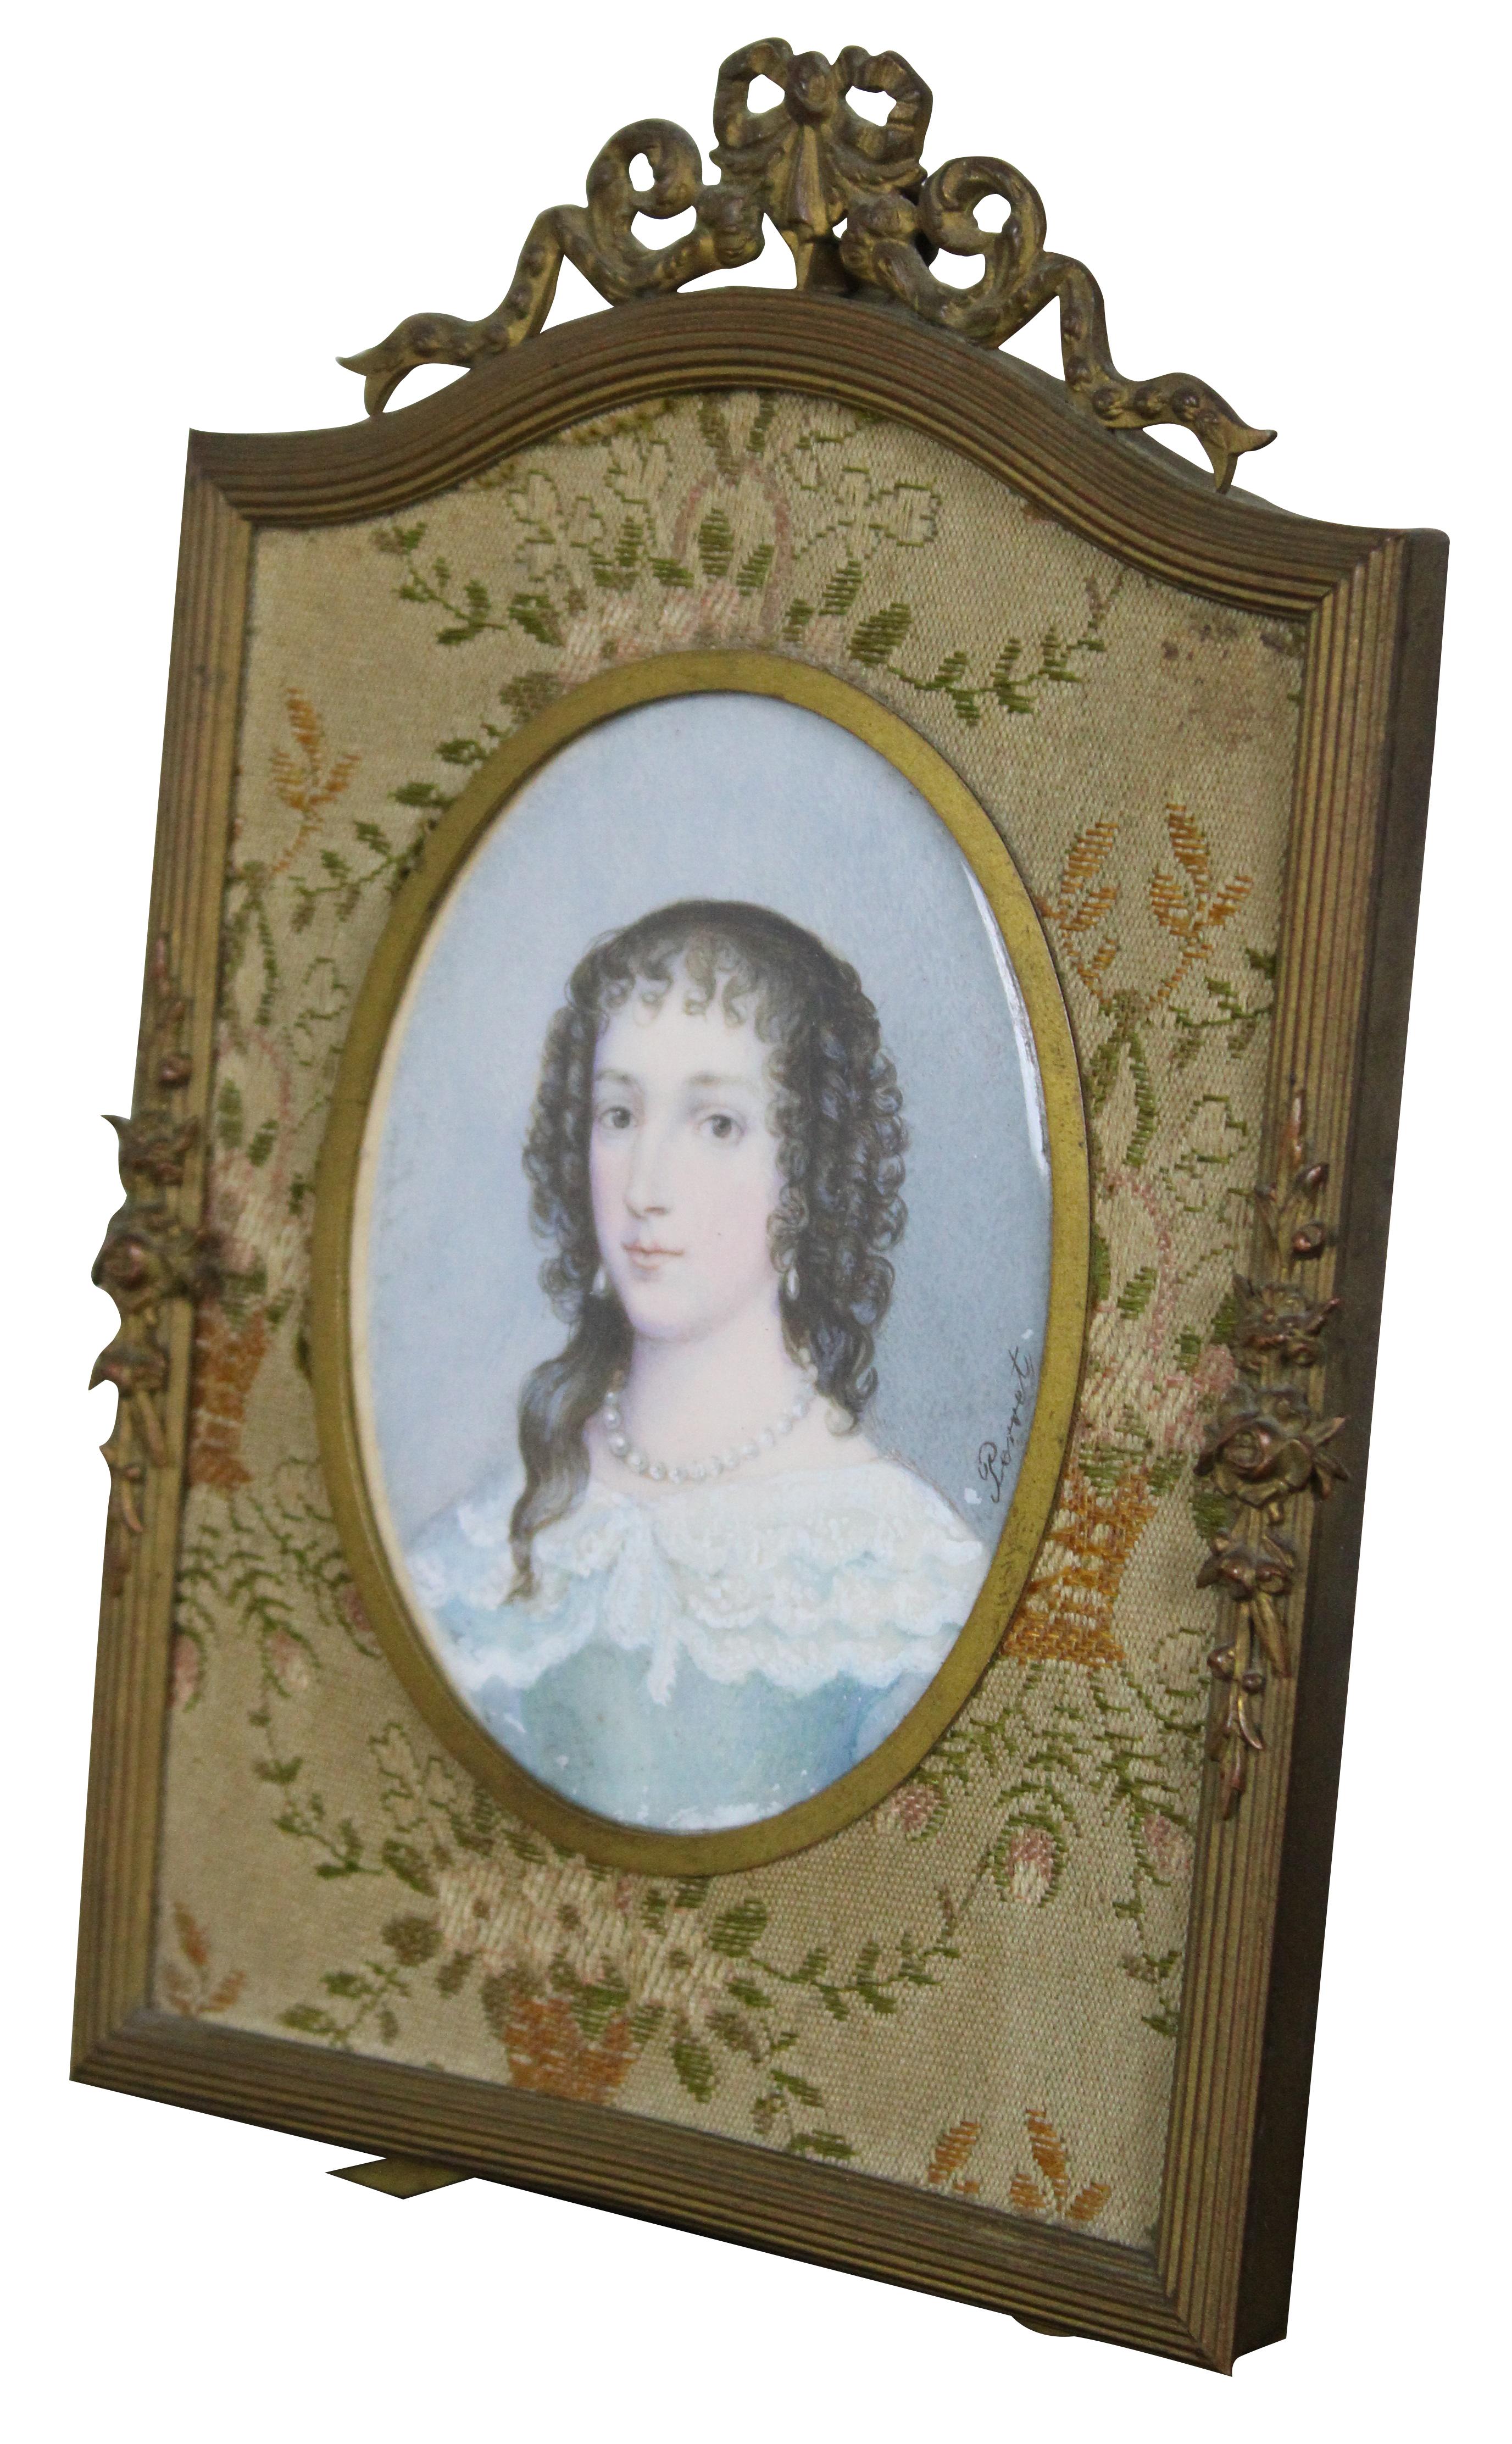 Antique miniature portrait painting of Queen Henrietta Maria by the French artist Aime Perret.  Young Henrietta is painted in a blue dress with white lace collar and brown curls. Signed along right side. Set in a Louis XV brass frame and matted in